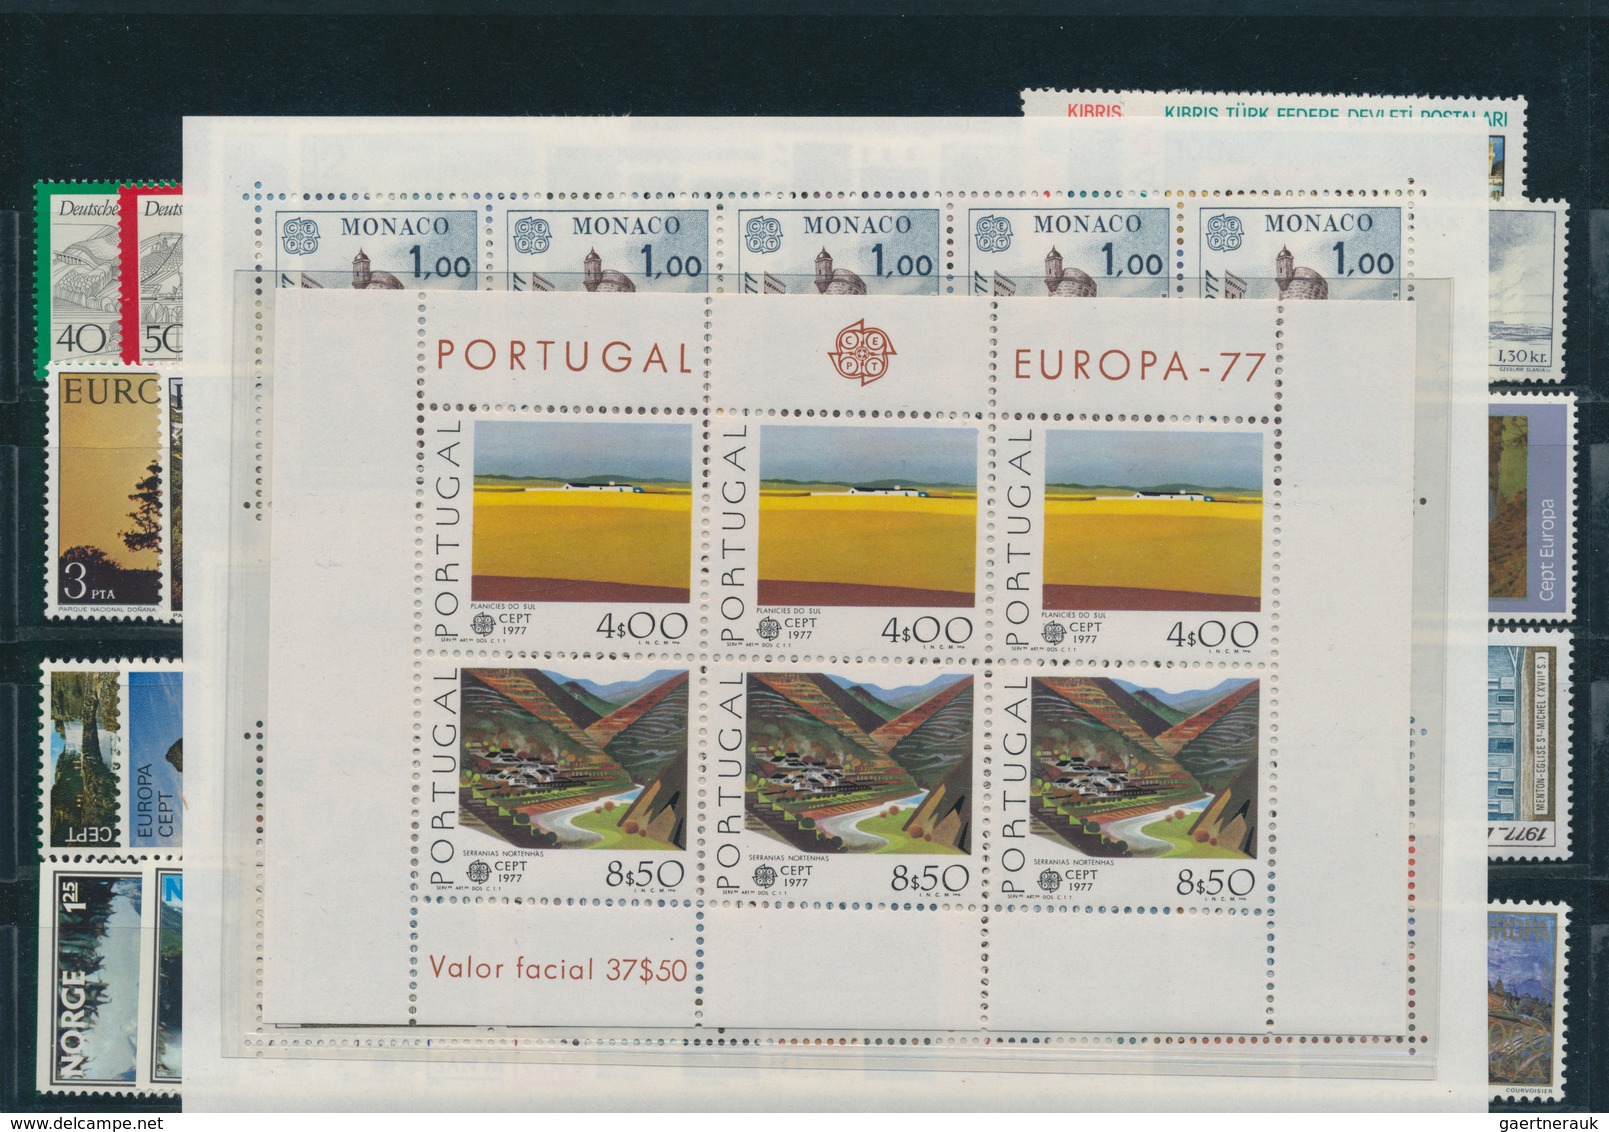 28838 Europa-Union (CEPT): Mint never hinged collection of the joint issues; complete in the main numbers;